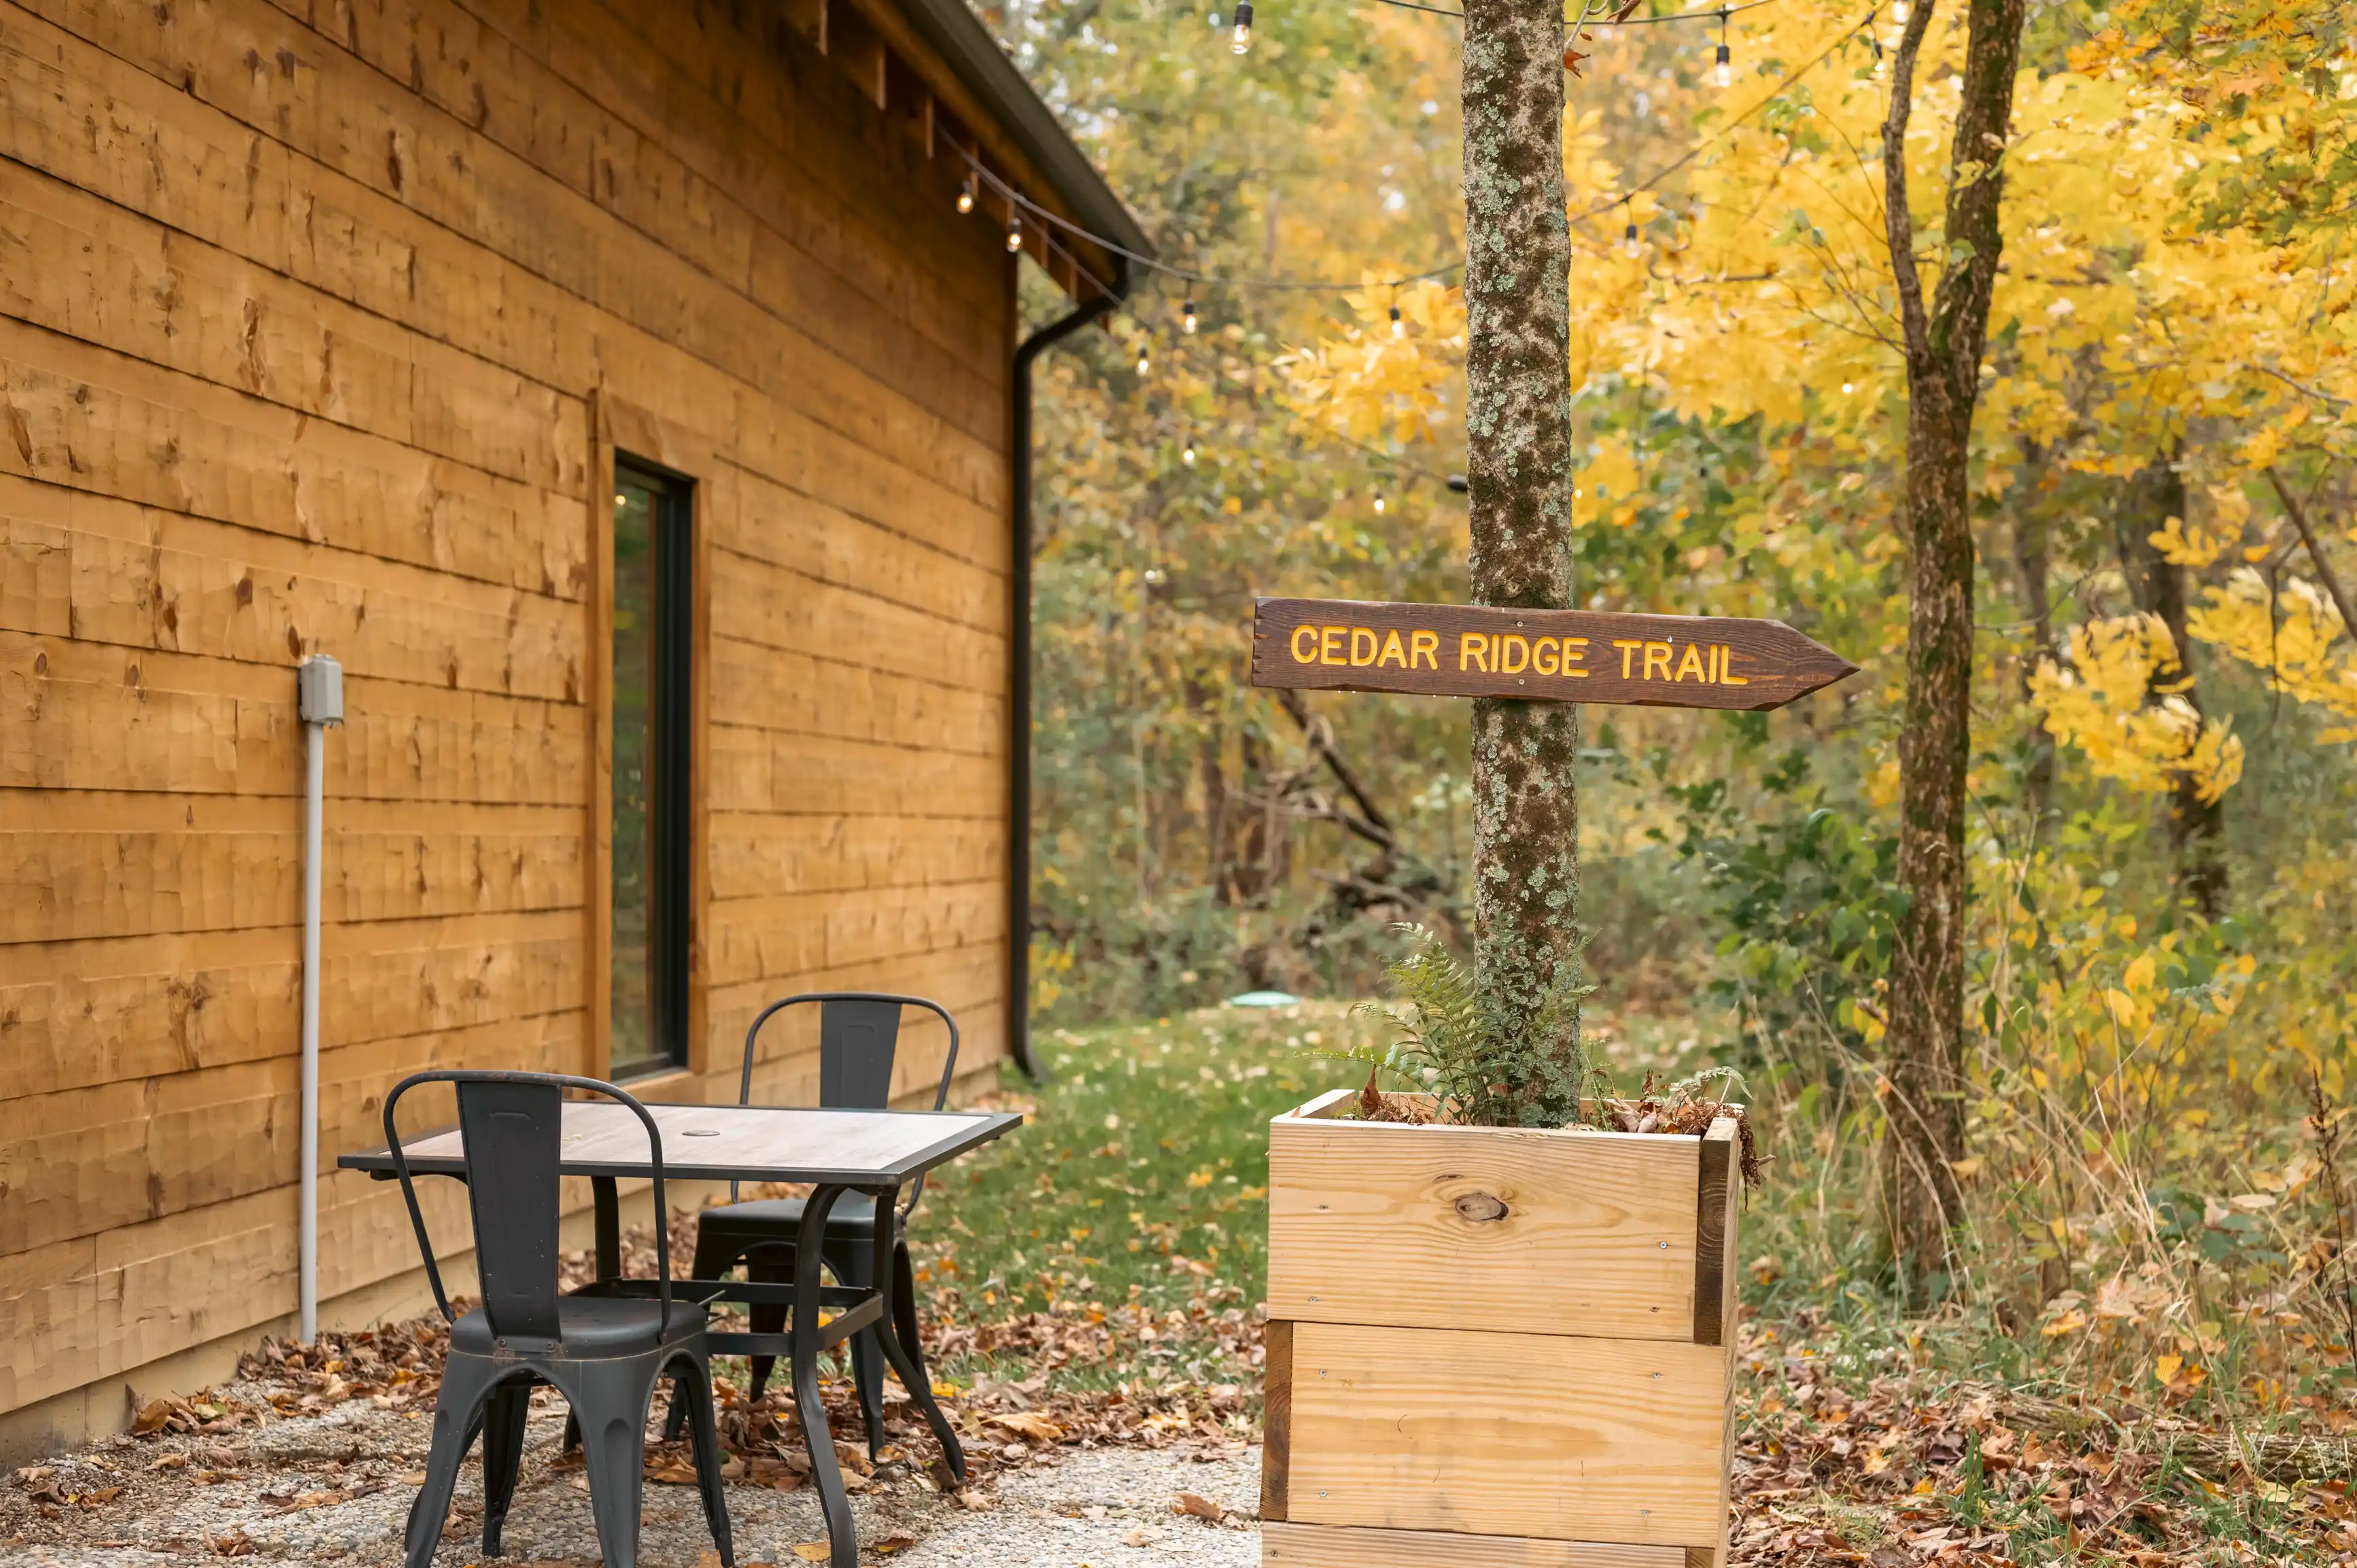 Outdoor setting with a "CEDAR RIDGE TRAIL" signpost near a cabin, with a table and chairs on gravel, surrounded by autumn trees.